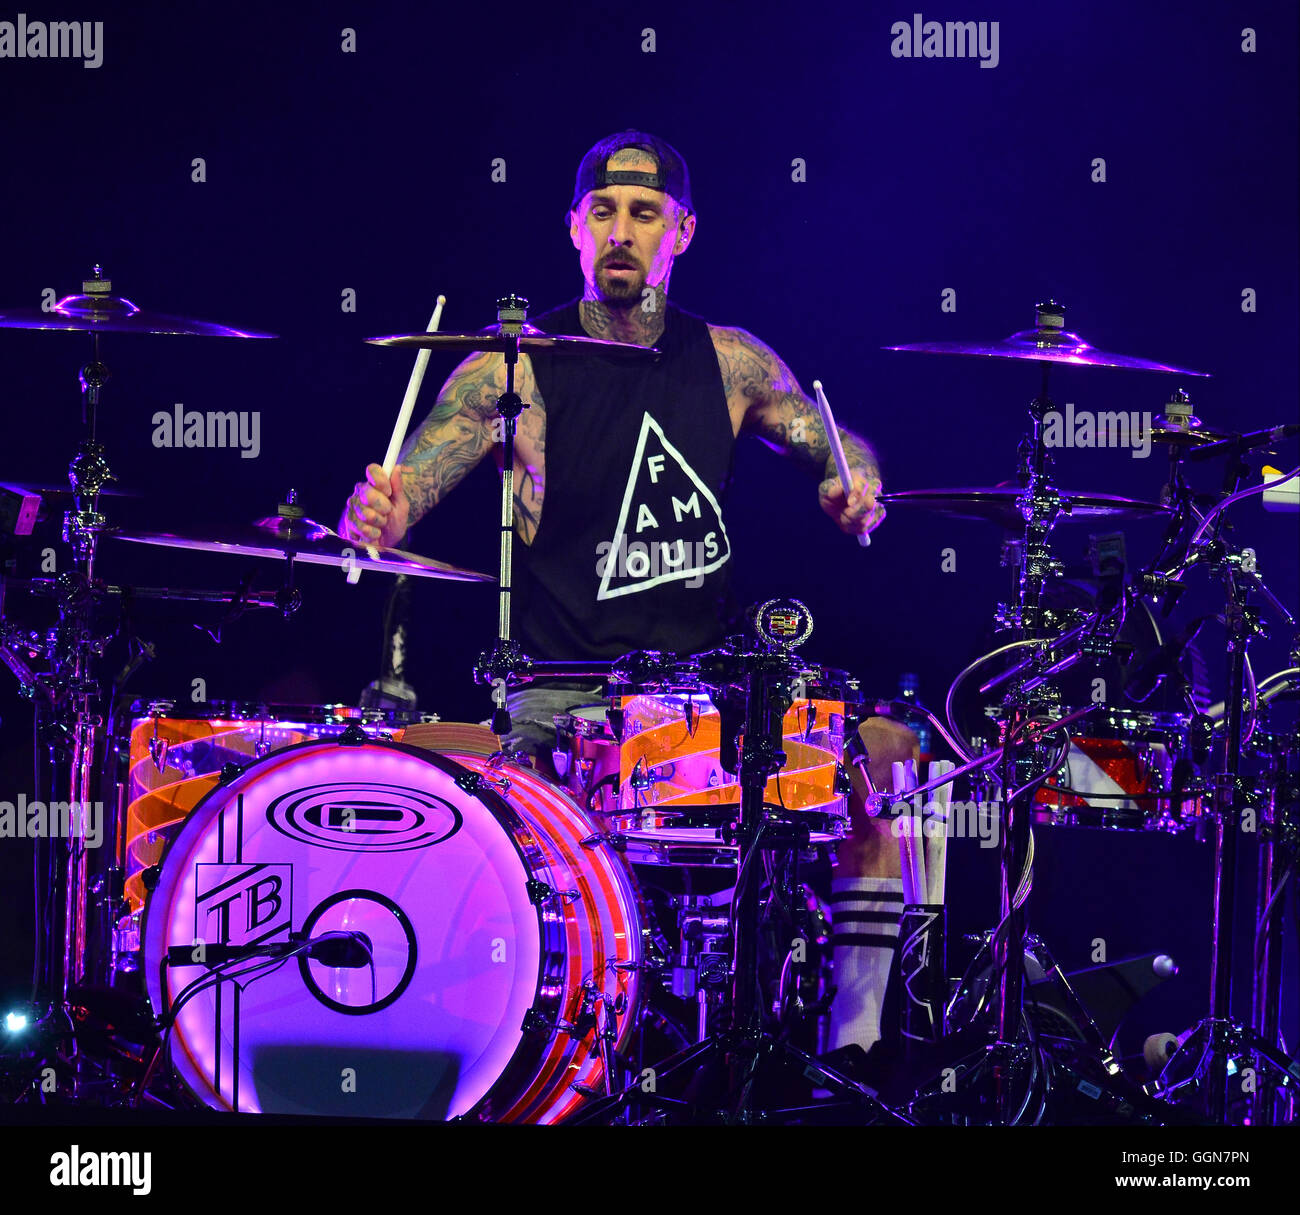 WEST PALM BEACH, FL - AUGUST 05: Musician Travis Barker of blink-182 perform at Perfect Vodka Amphitheatre on August 5, 2016 in West Palm Beach, Florida.  Credit: MPI10 / MediaPunch Stock Photo